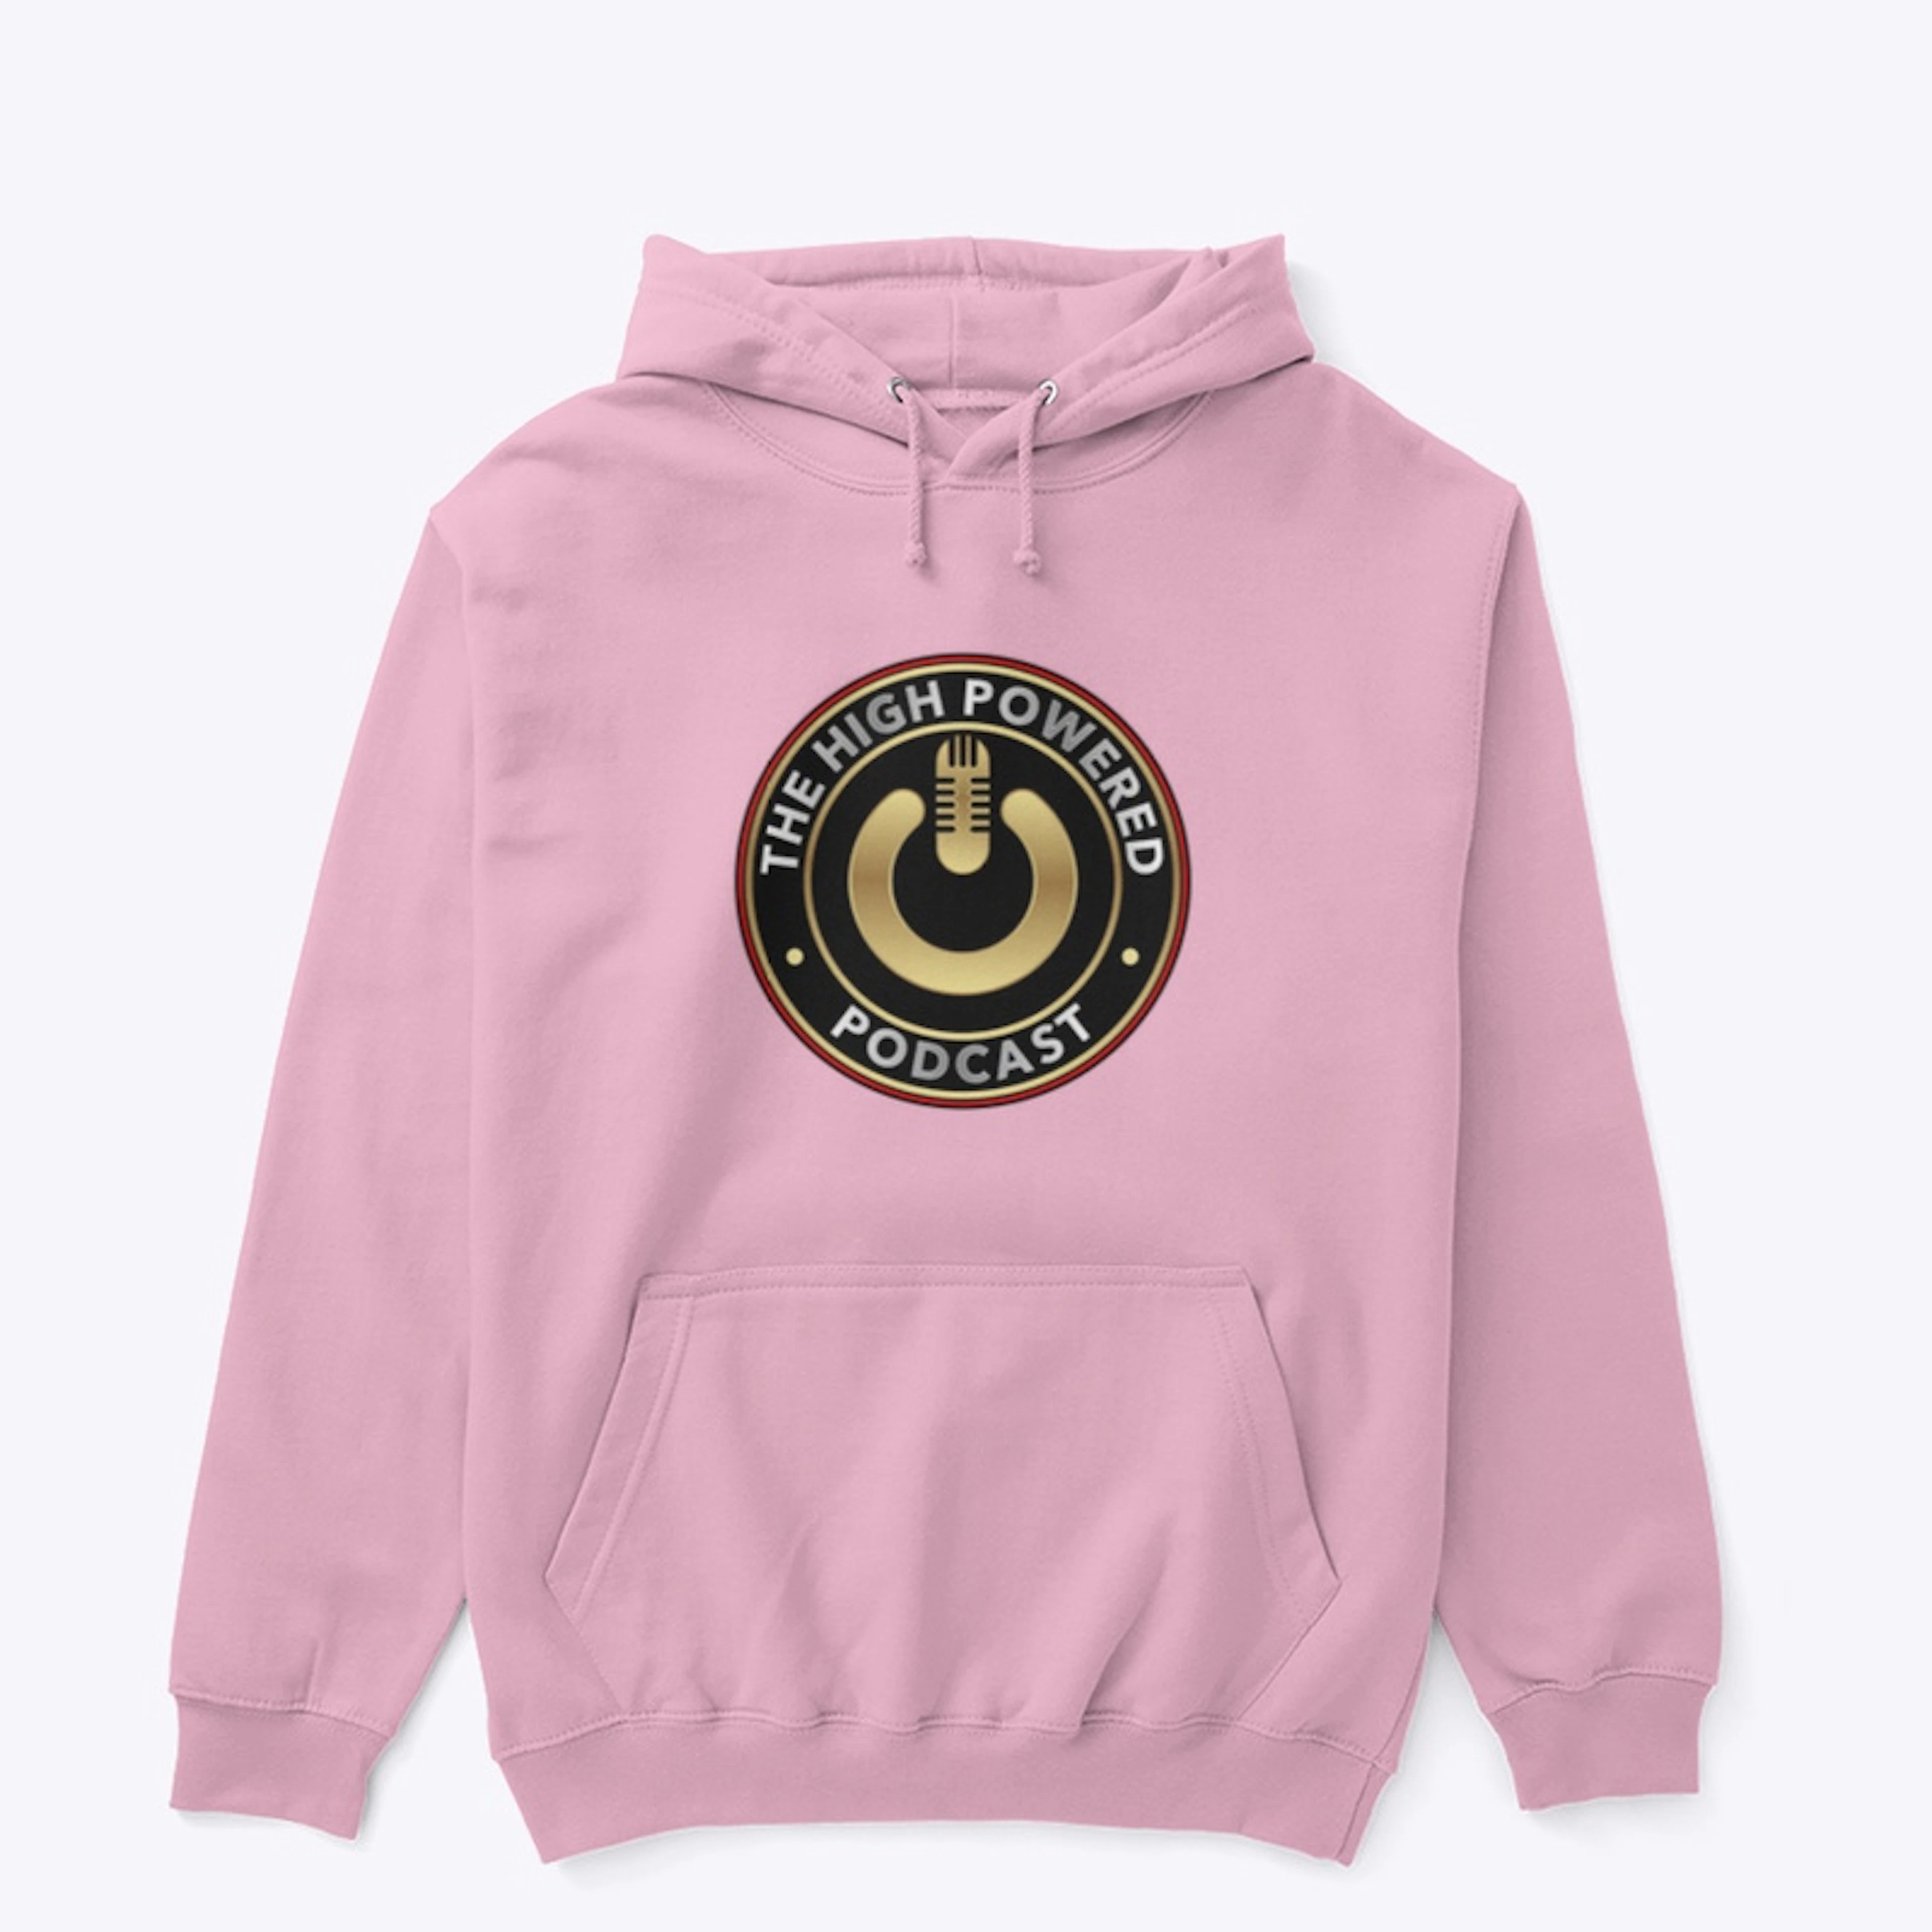 High Powered Podcast Hoodie